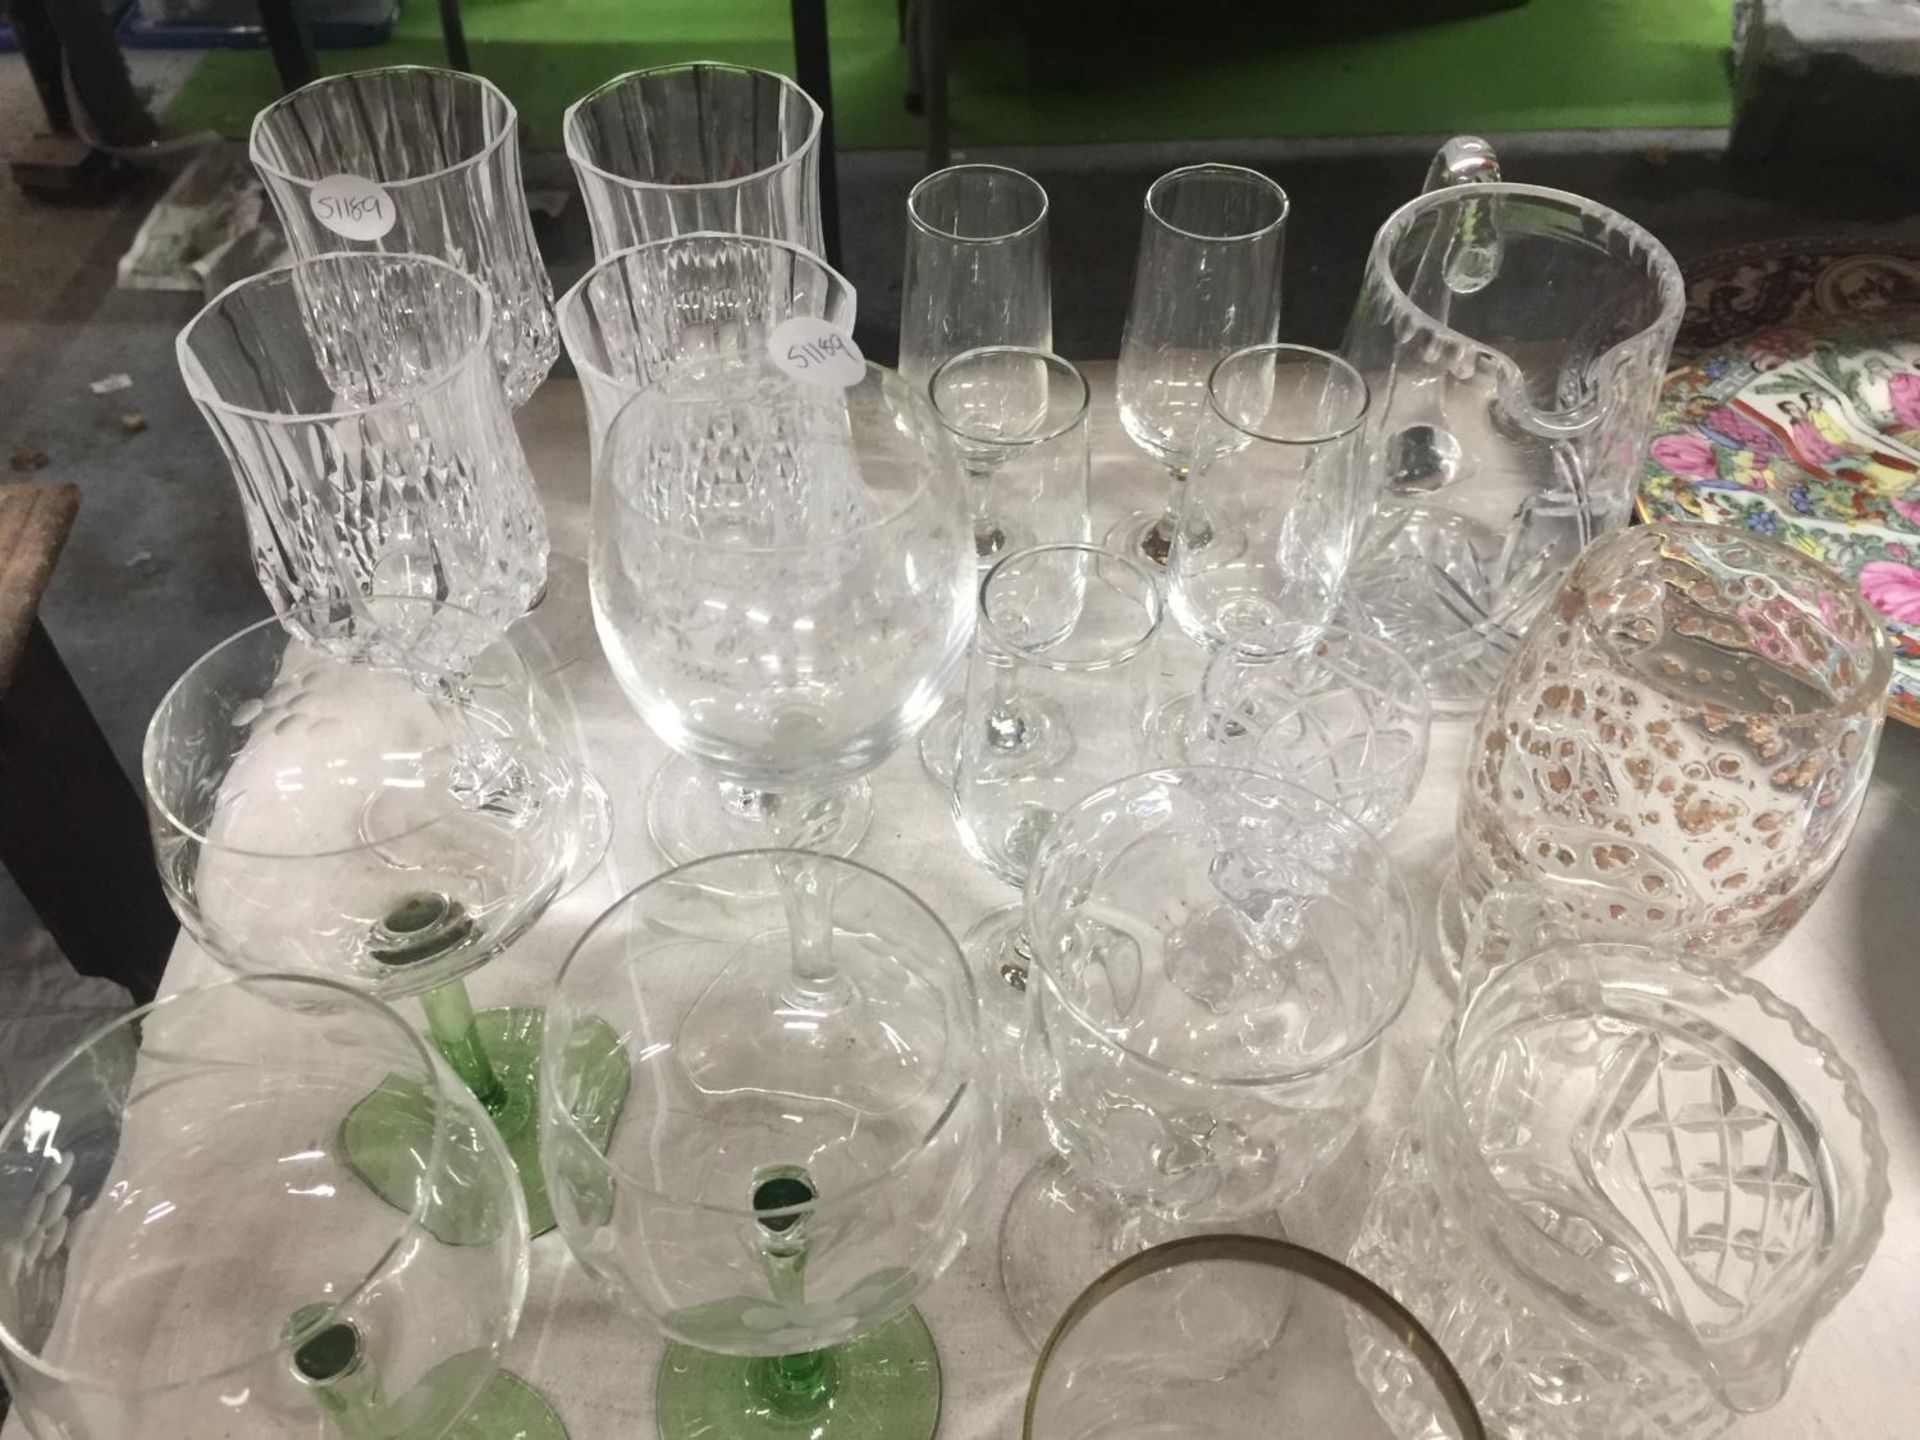 A QUANTITY OF GLASSWARE TO INCLUDE WINE GLASSES, TUMBLERS, SHOT GLASSES, ETC., - Image 2 of 2